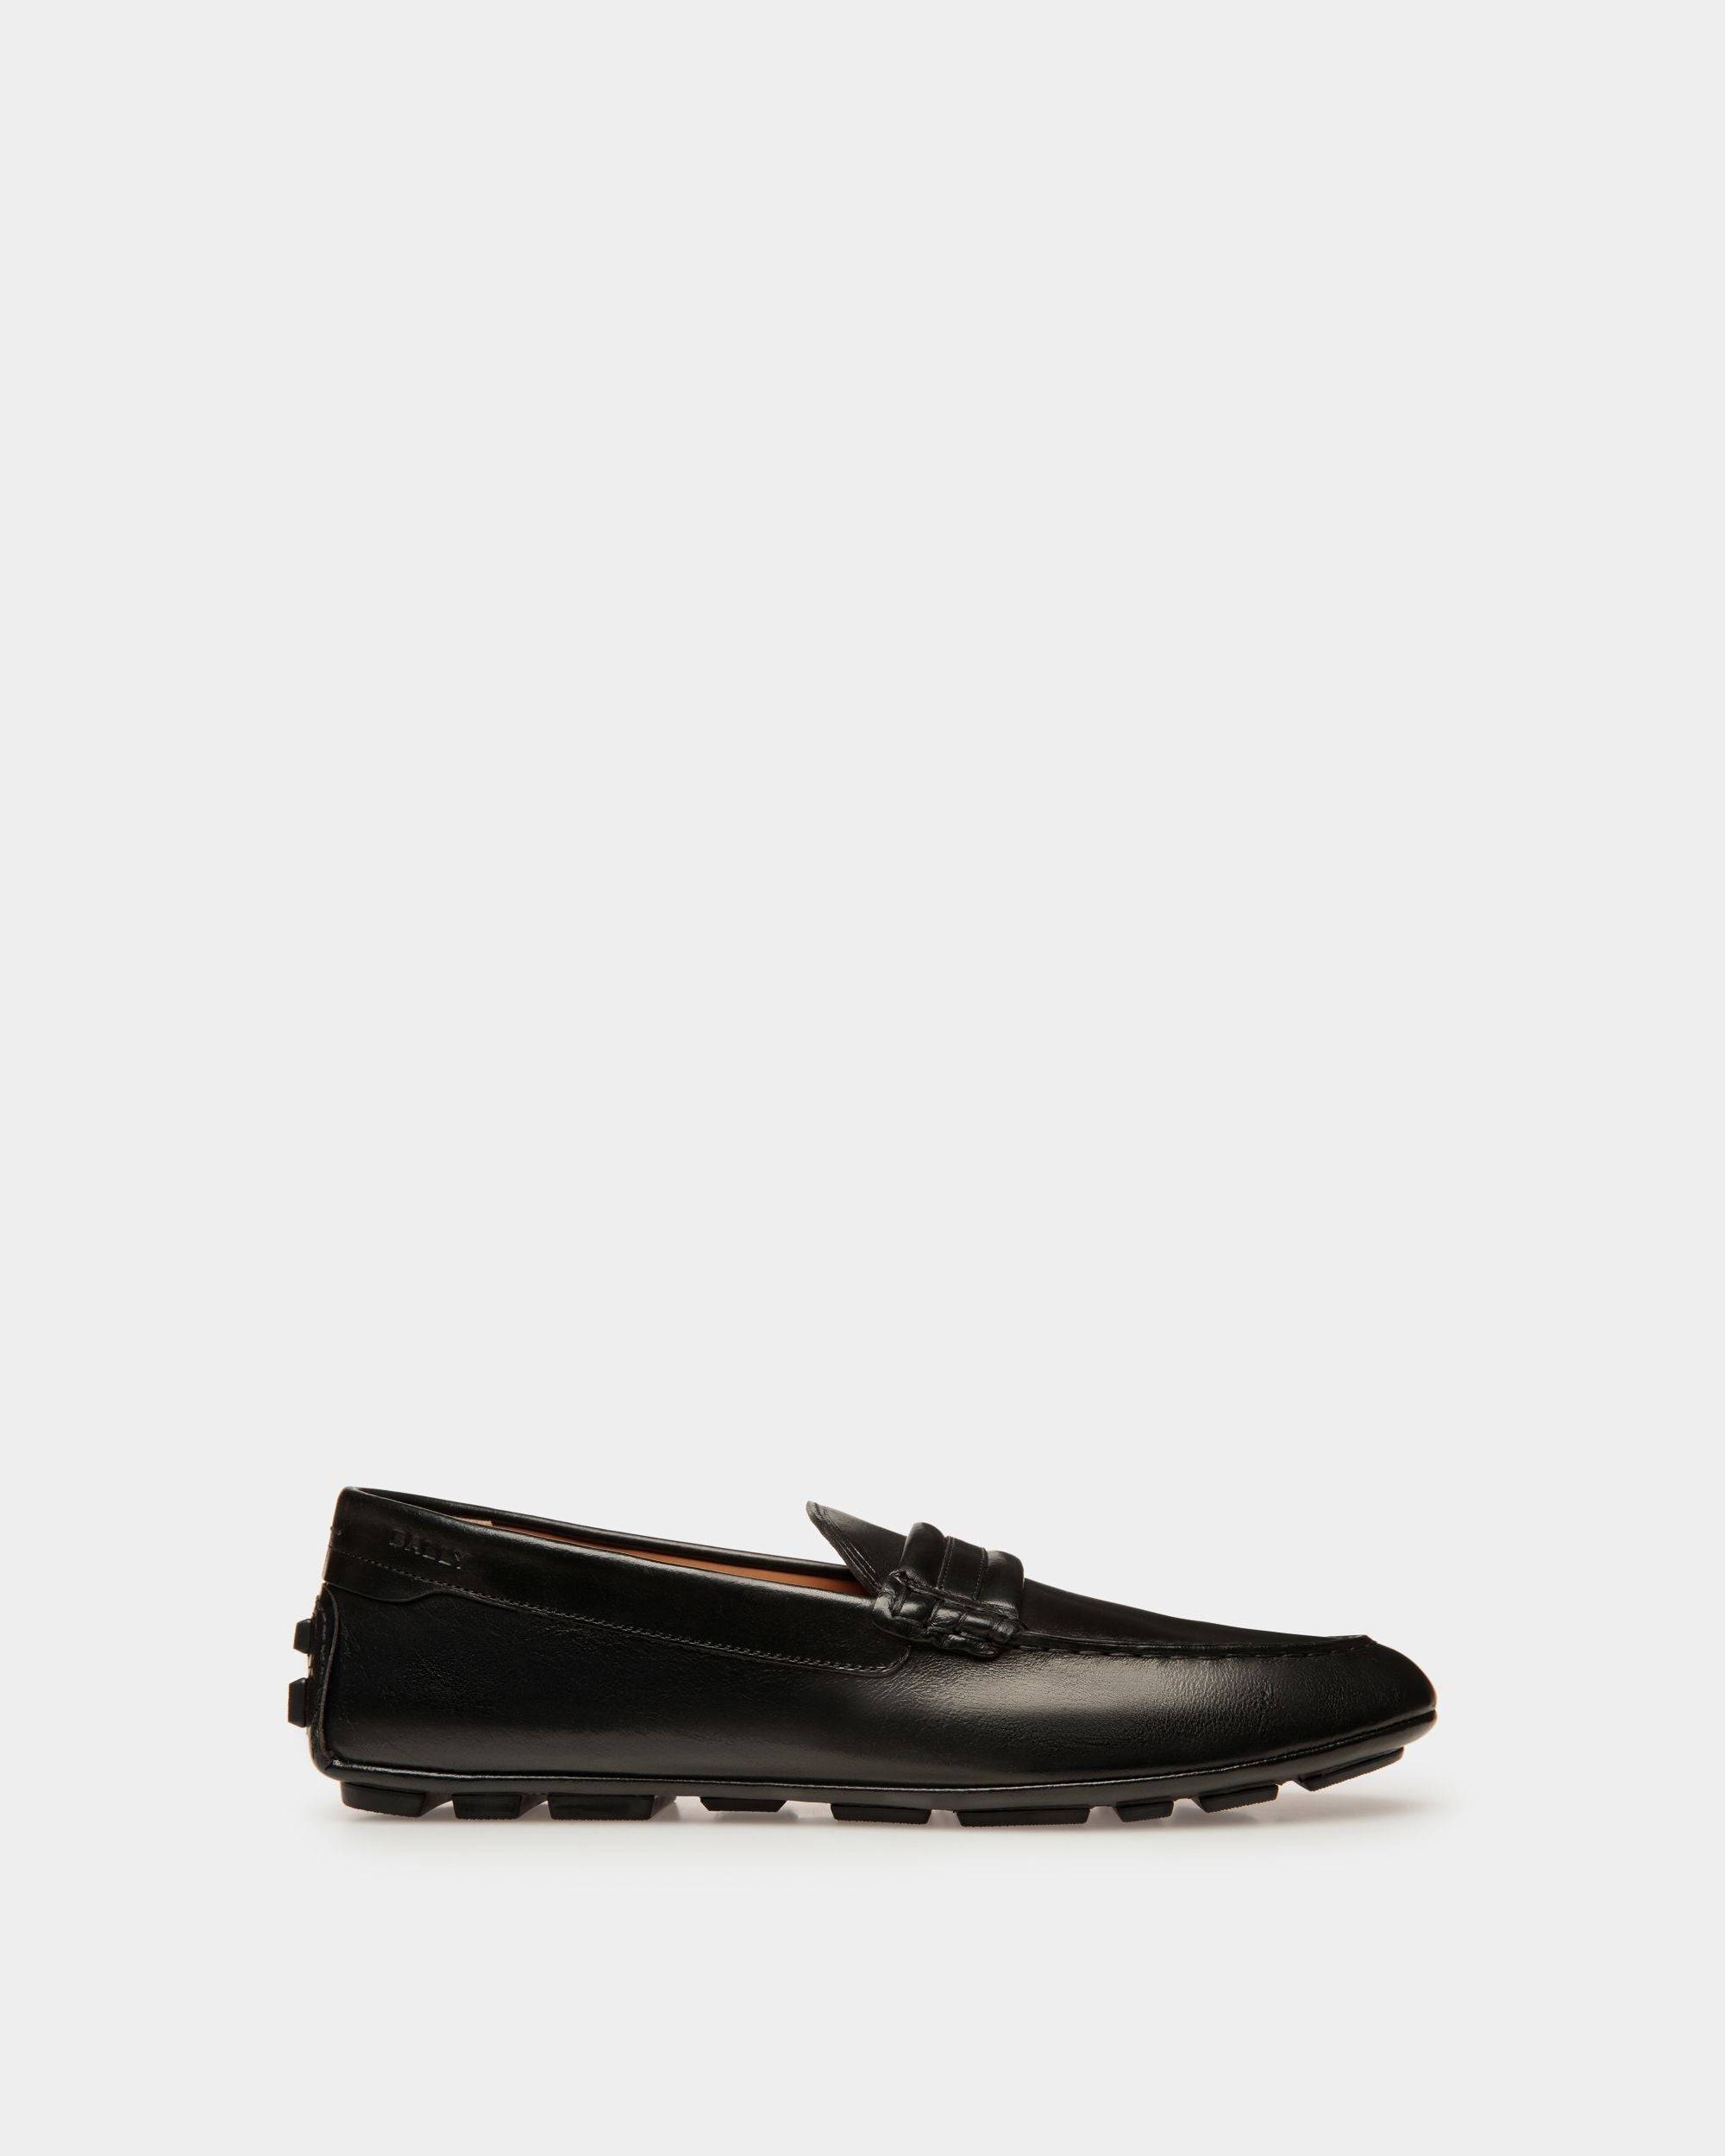 Kerbs | Men's Driver in Black Leather | Bally | Still Life Side